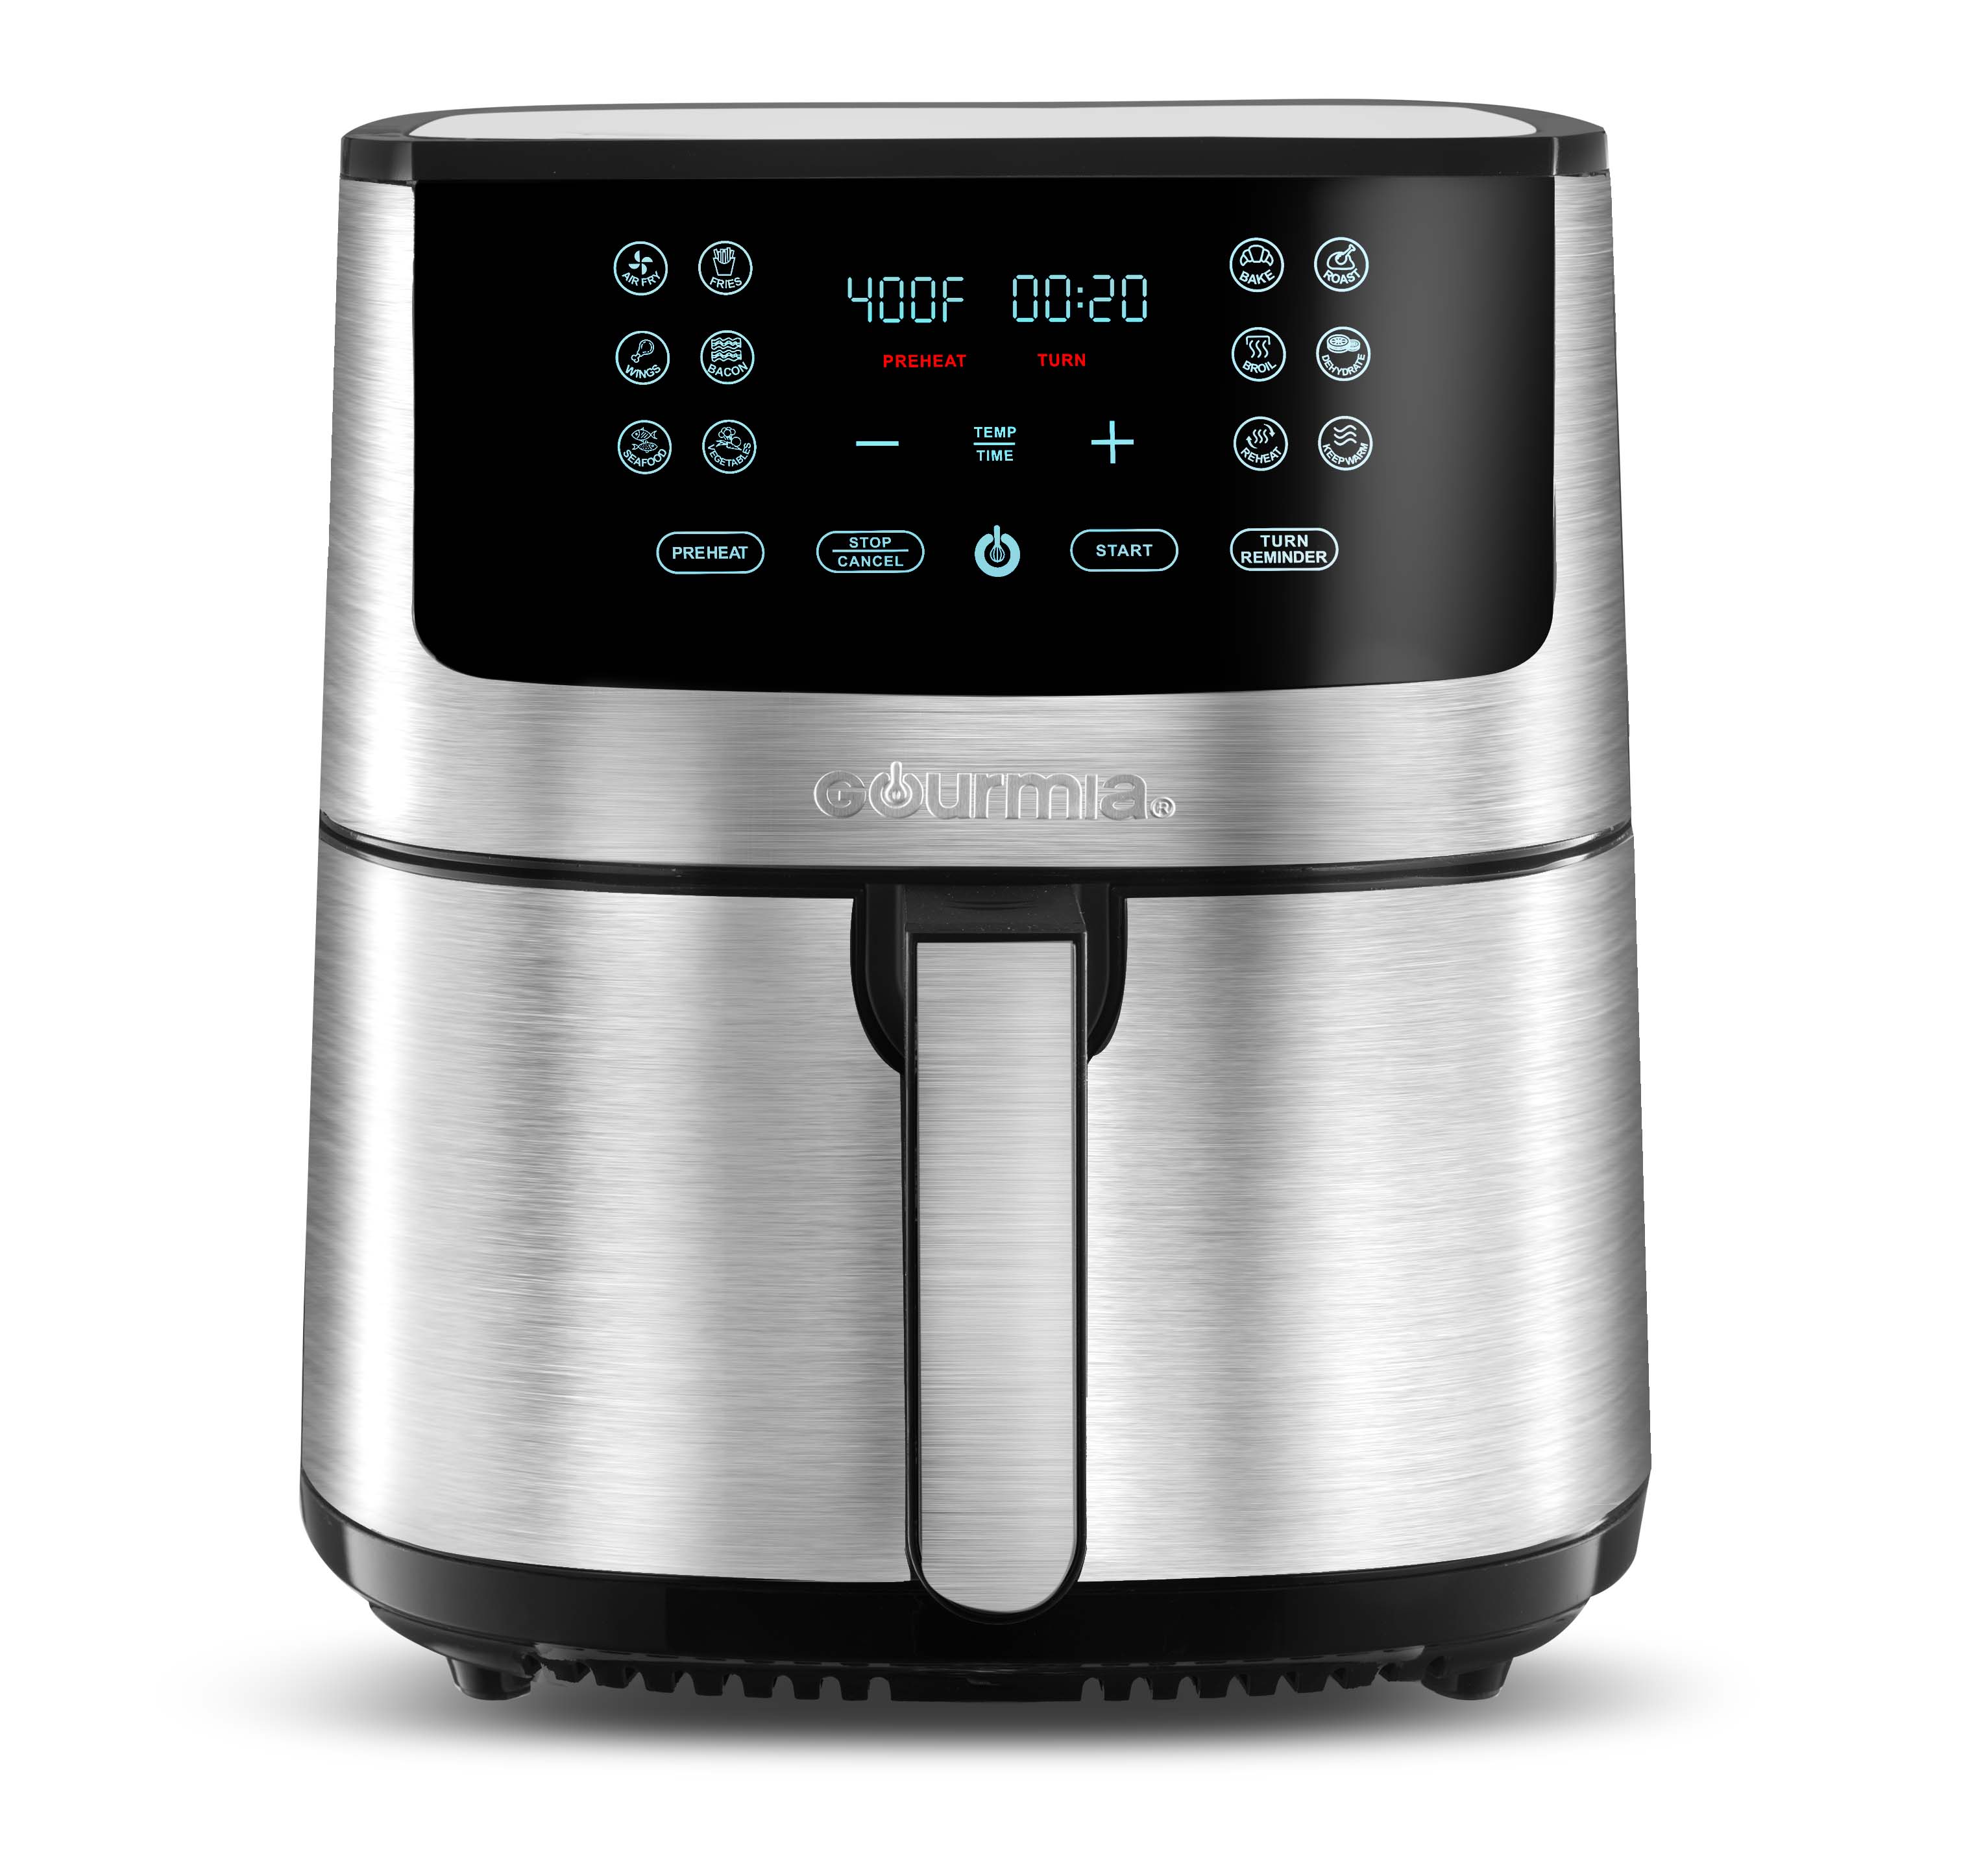 Gourmia 8-Qt Digital Air Fryer with Guided Cooking, Stainless Steel, 13.5 High, New - image 1 of 6